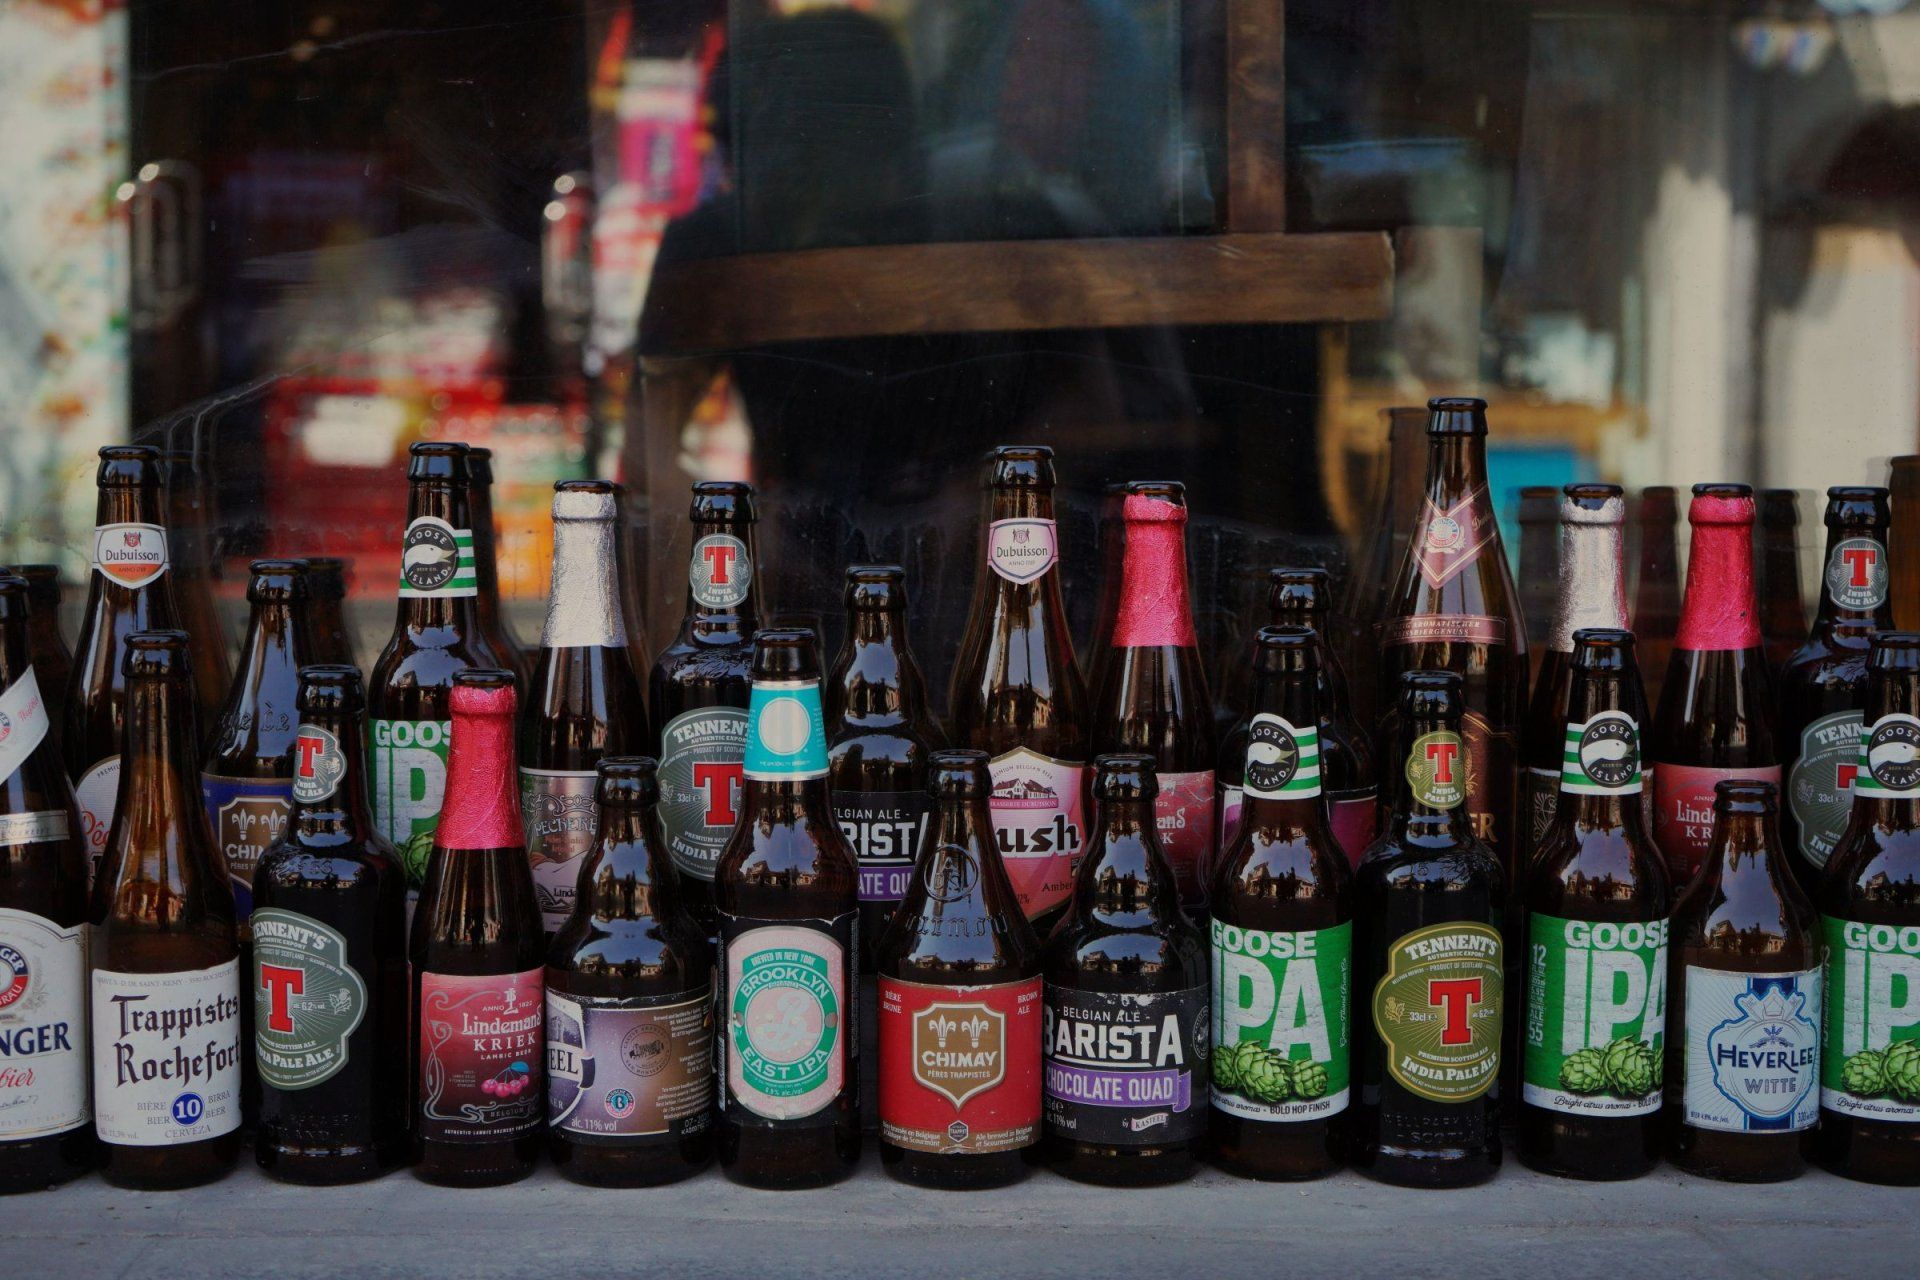 a row of bottles of beer including goose ipa